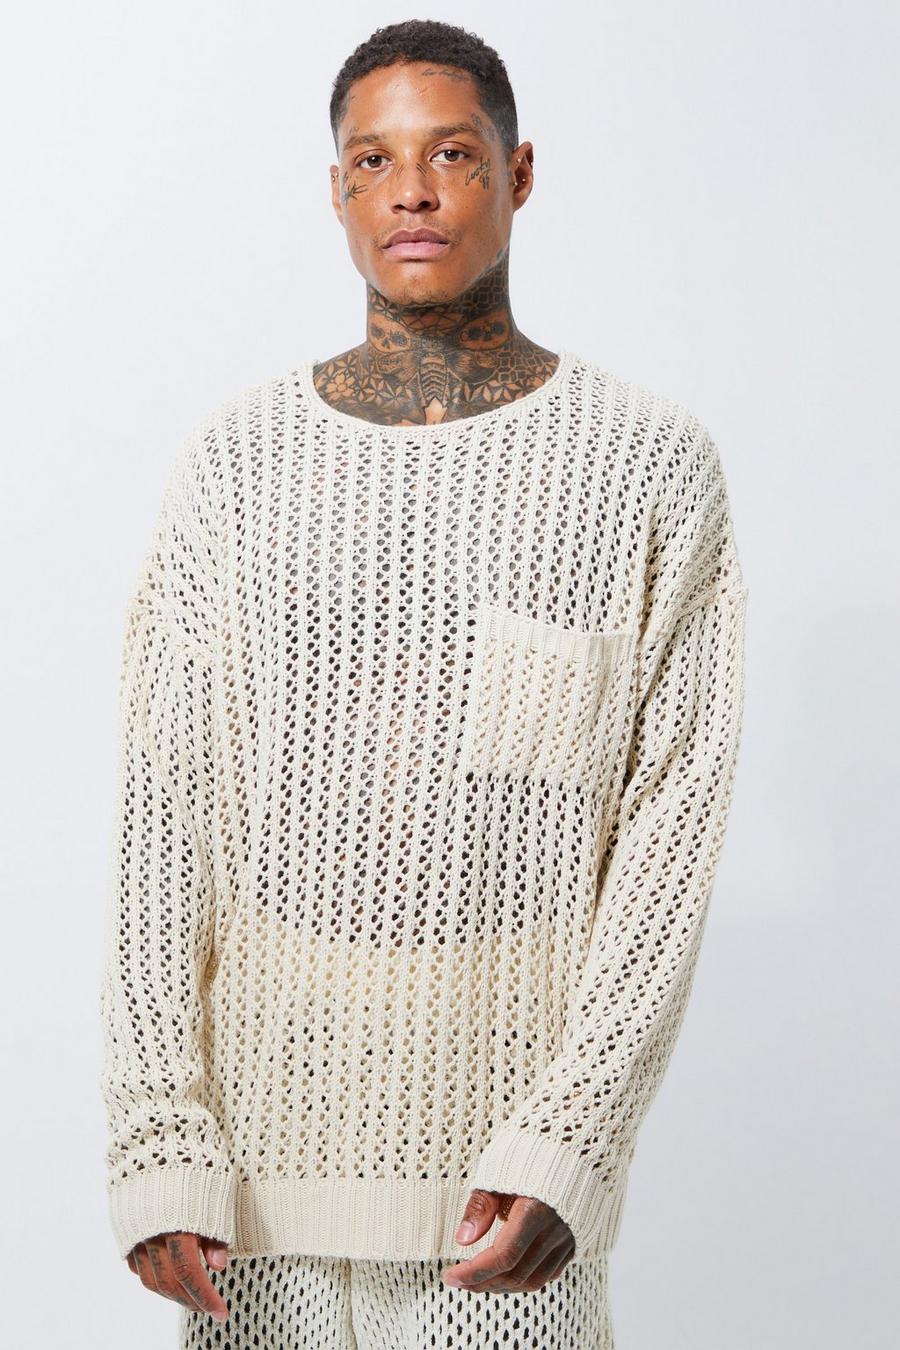 Plus Boxy Boucle Knit Extended Neck Jumper